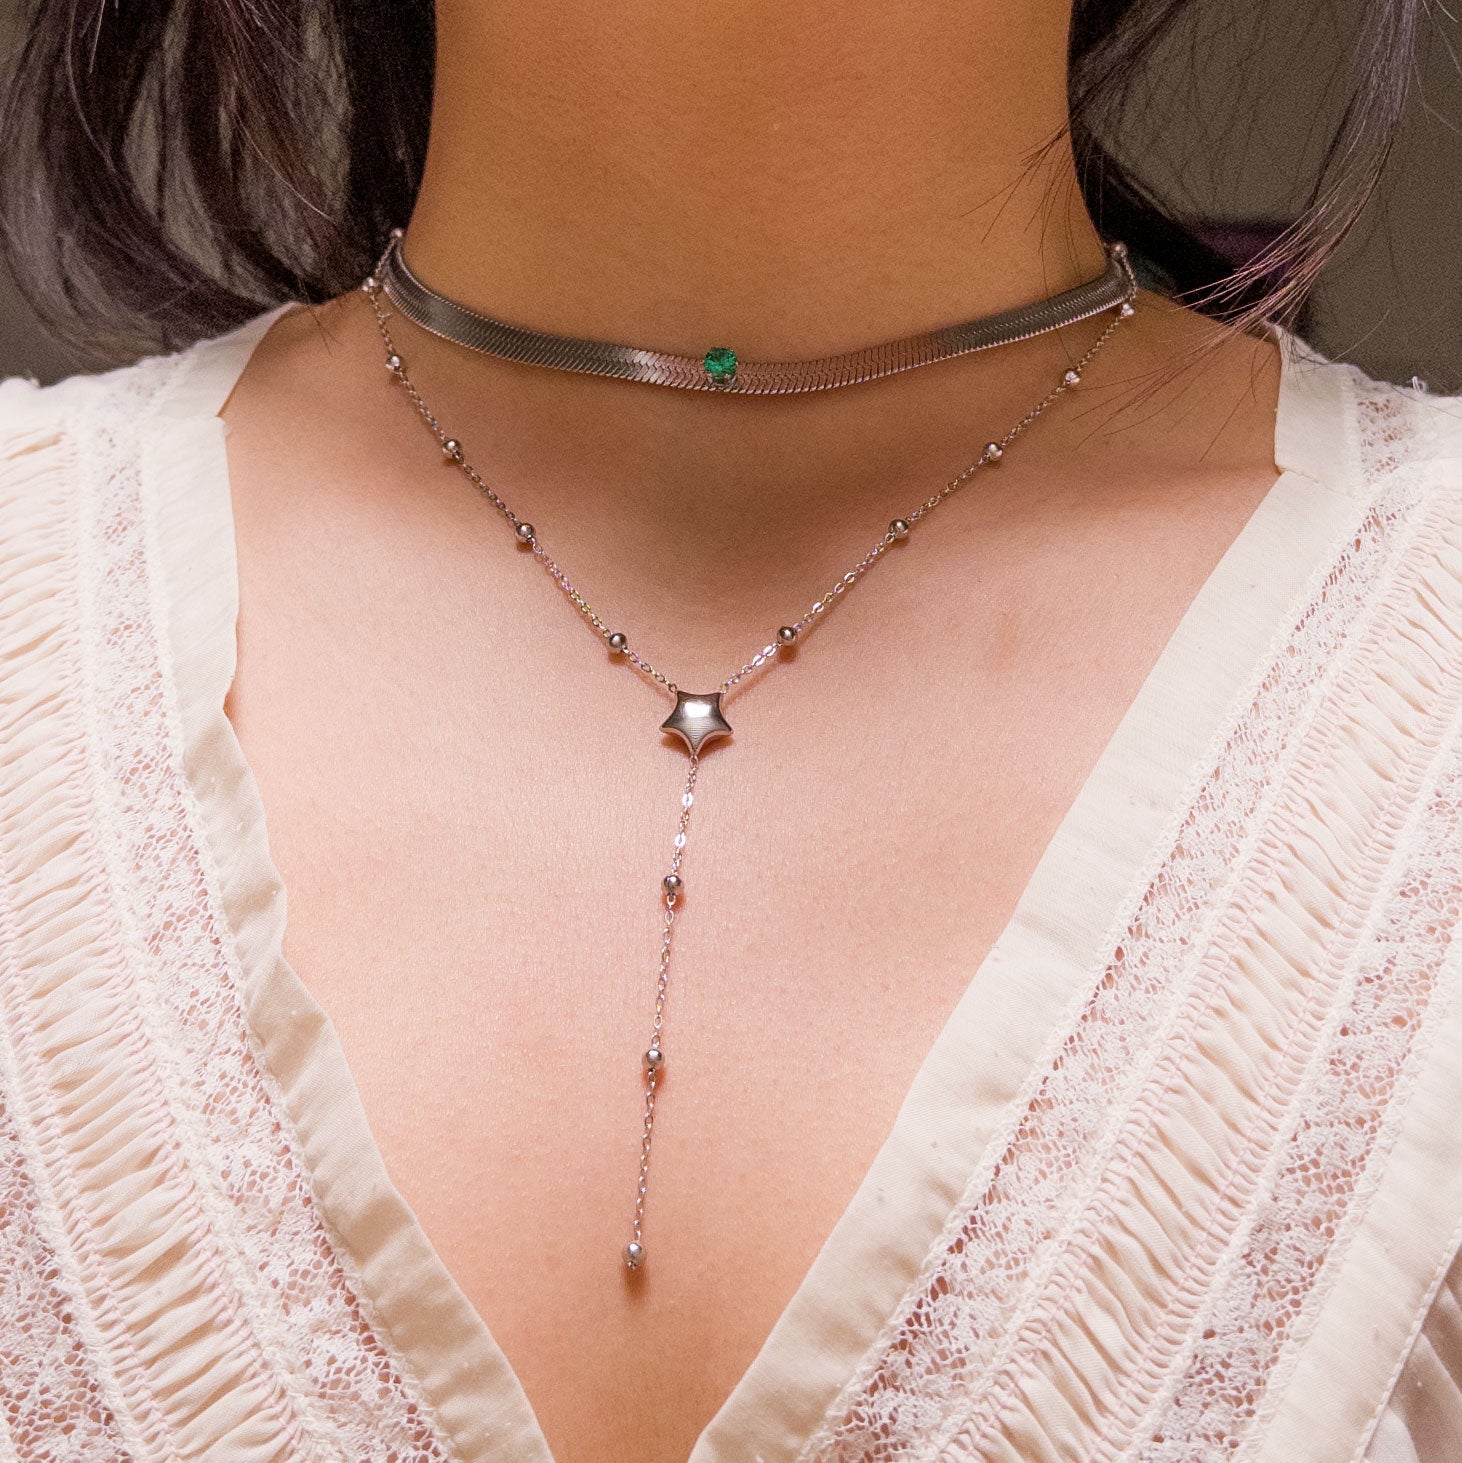 Stainless steel silver colored snake chain choker/necklace featuring a sage green cubic zirconia gem in the center. Can be dress up or down. Perfect for layering and everyday wear. 